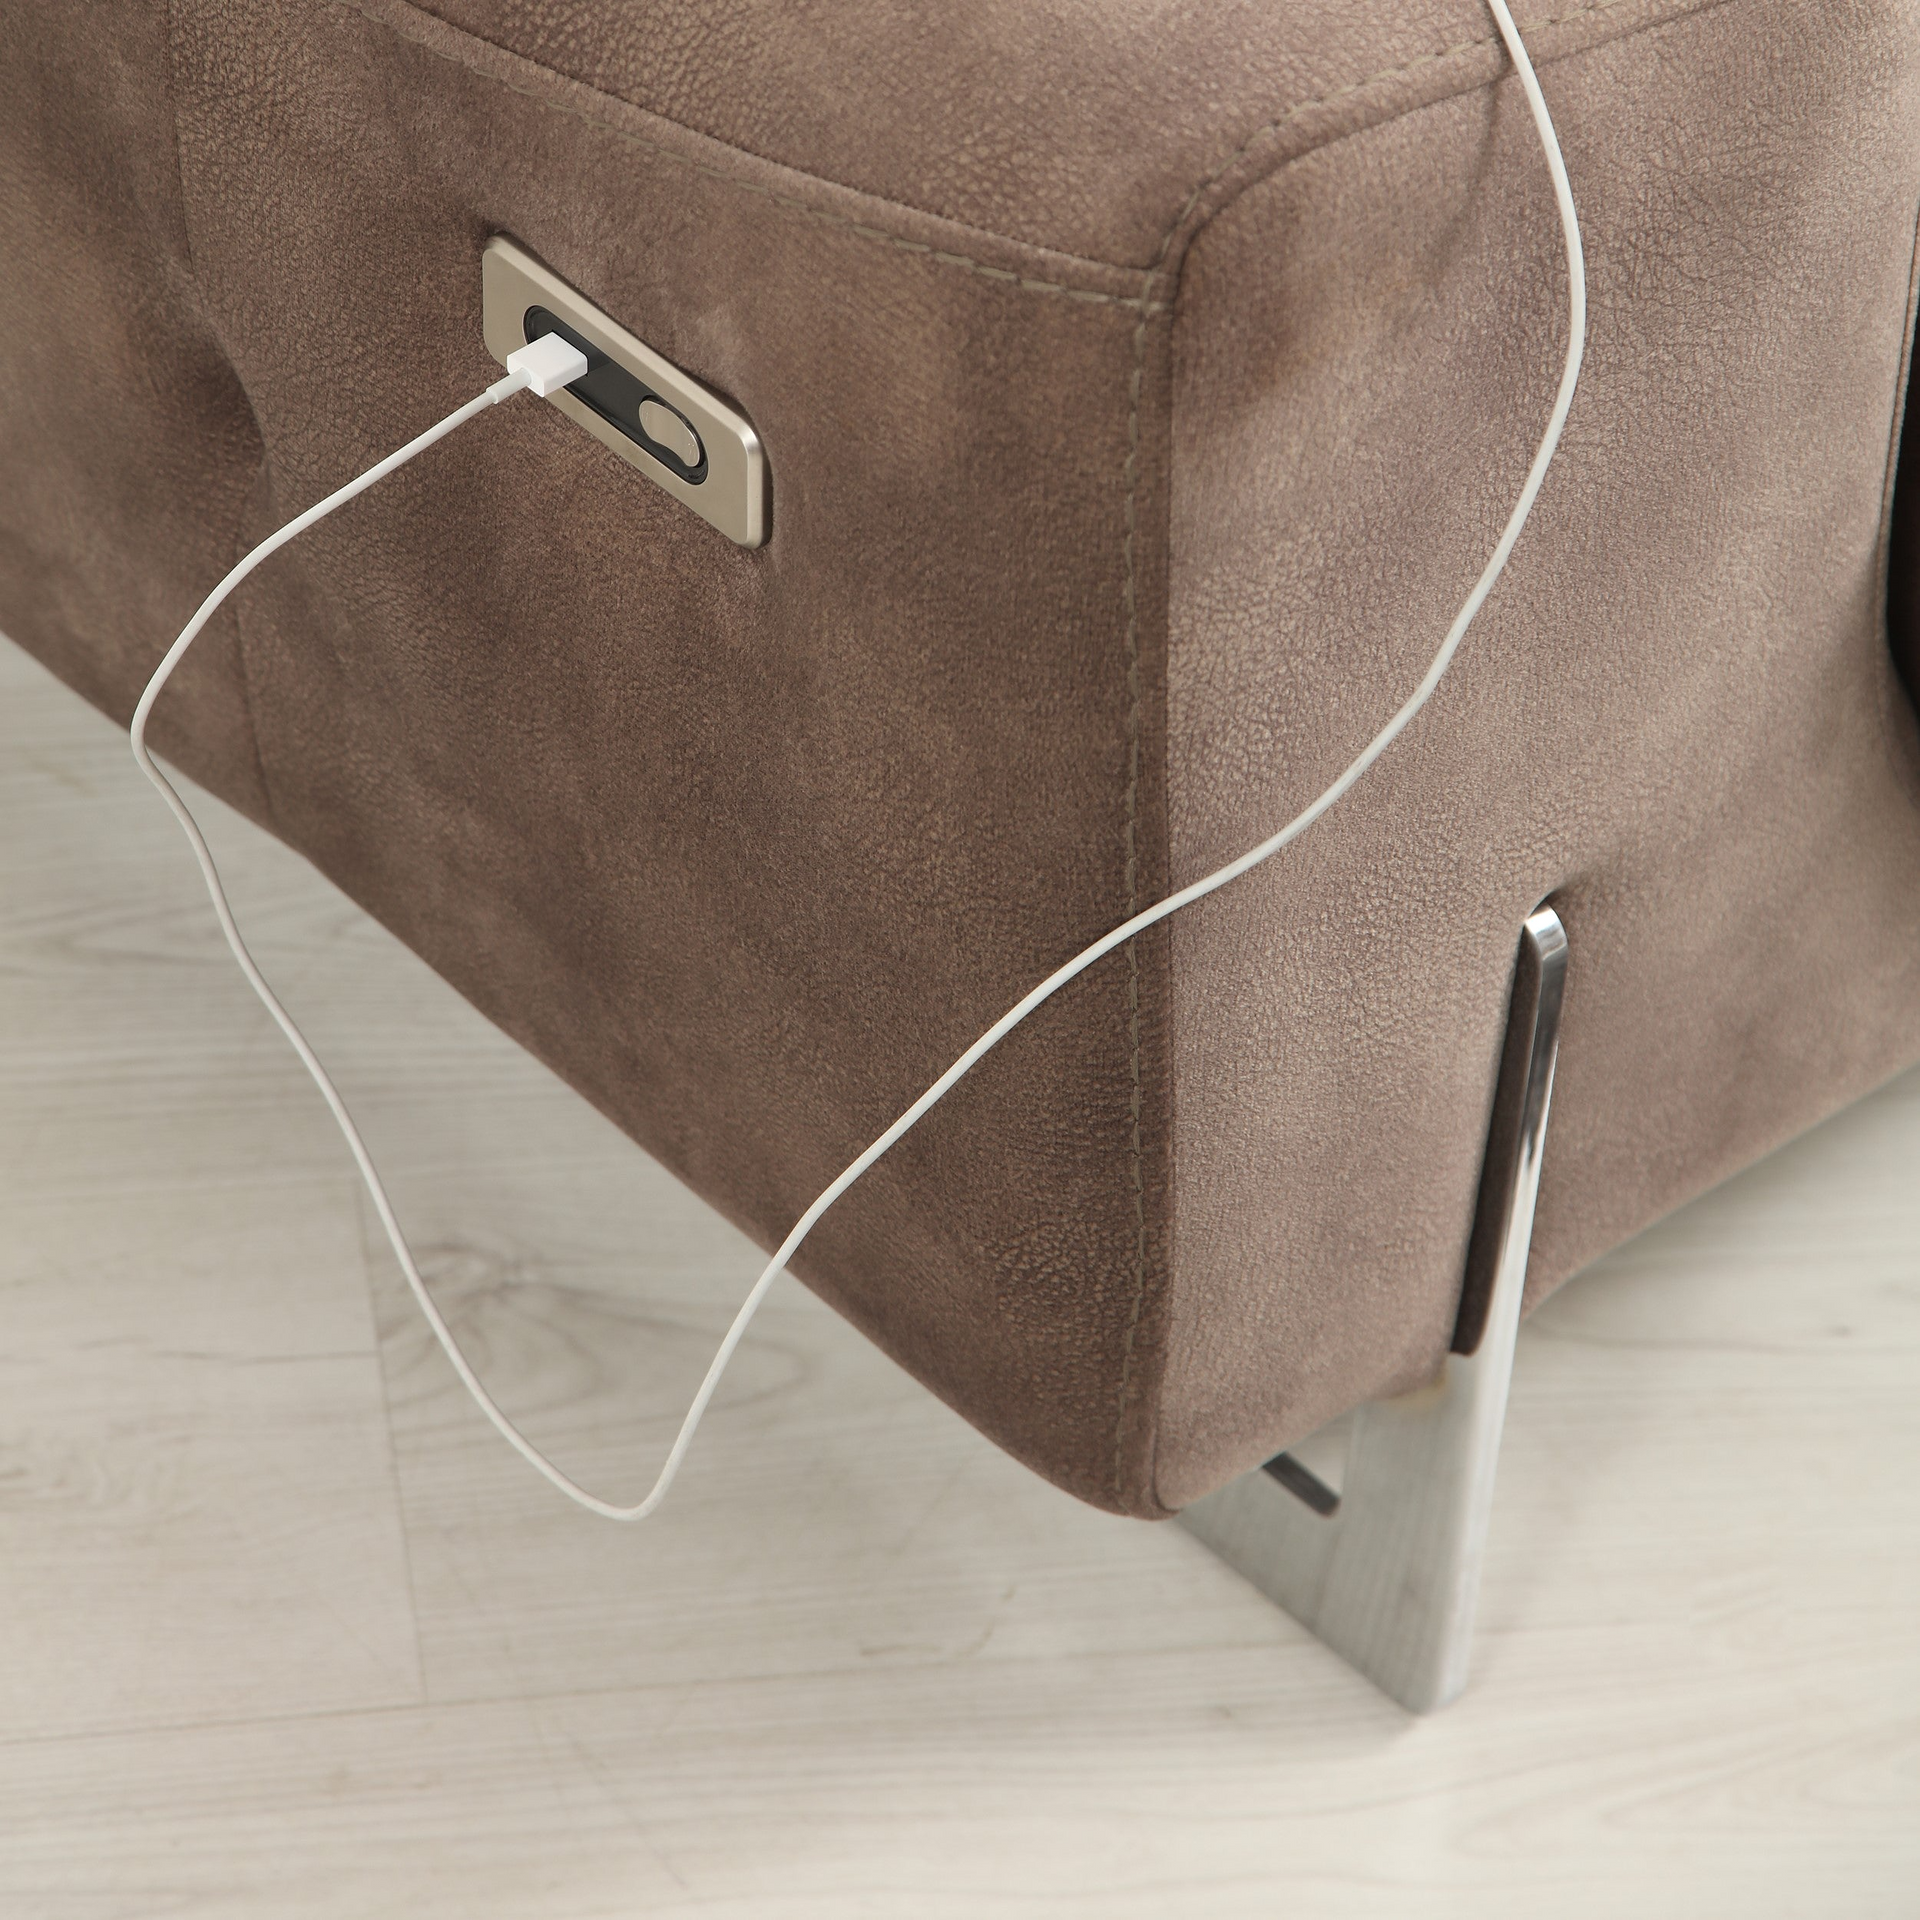 a close up of a couch with a cord attached to it